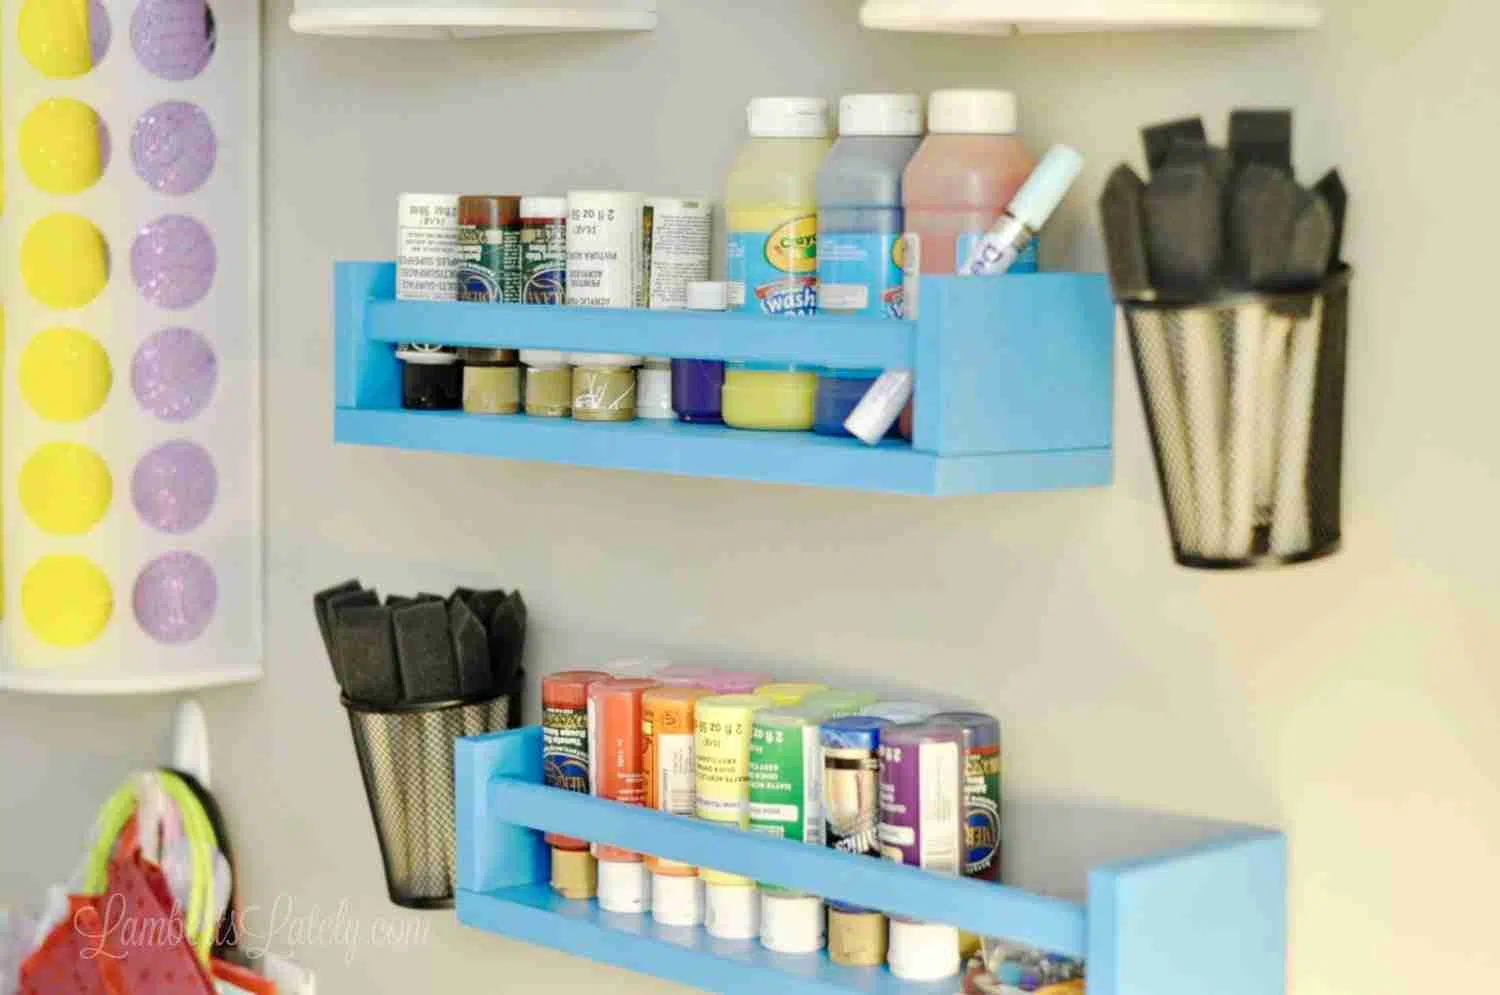 blue wooden shelves hanging on a wall, holding paint jars